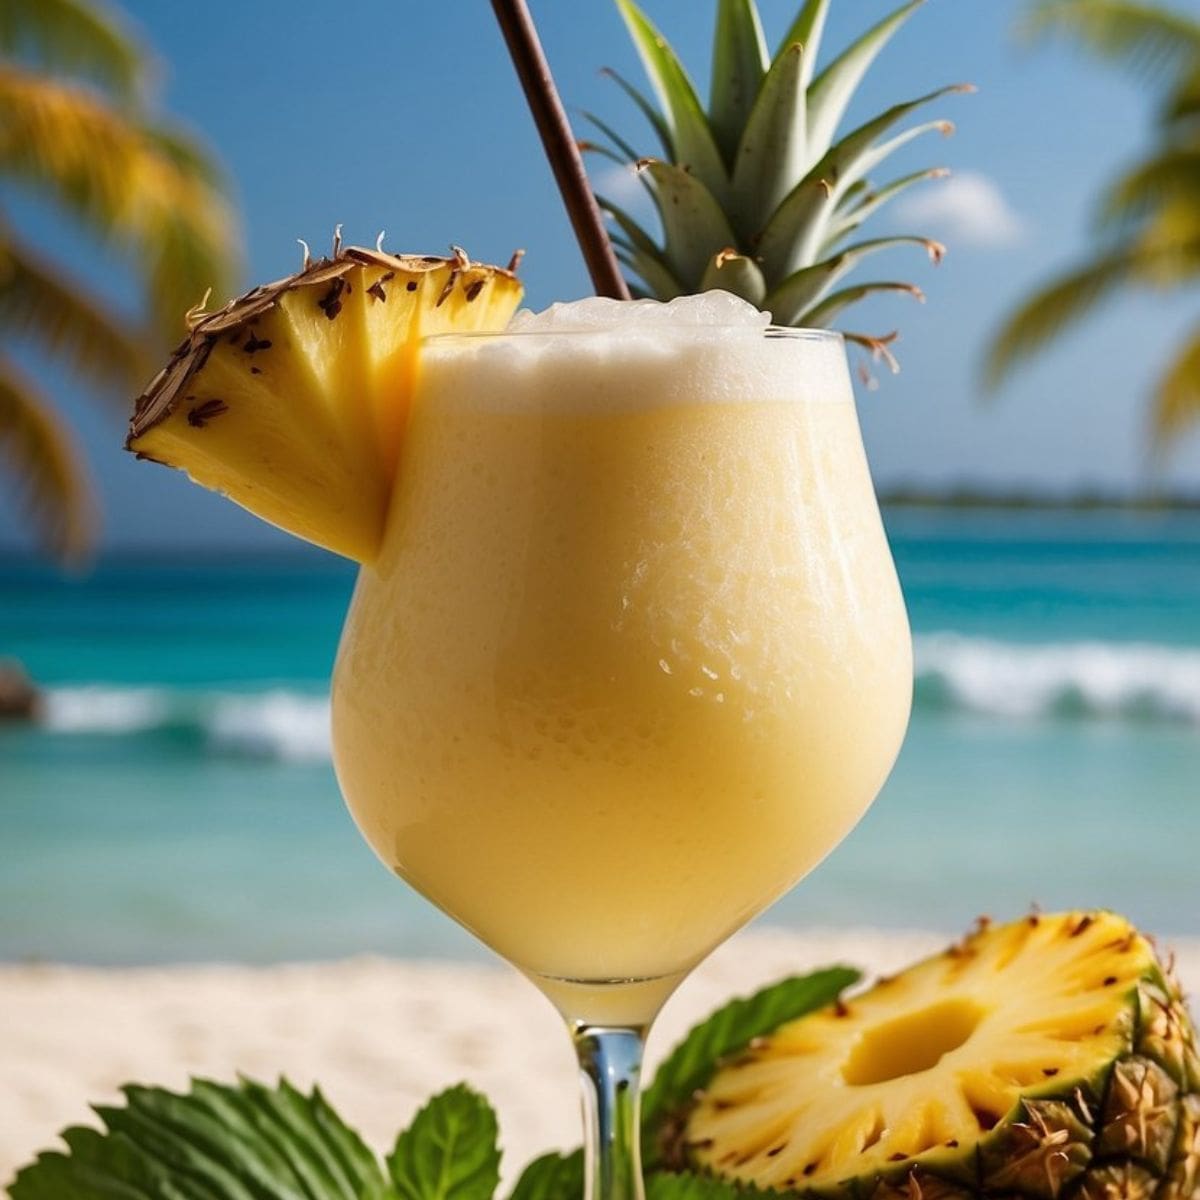 A glass of spiced rum piña colada with a slice of pineapple on the beach.